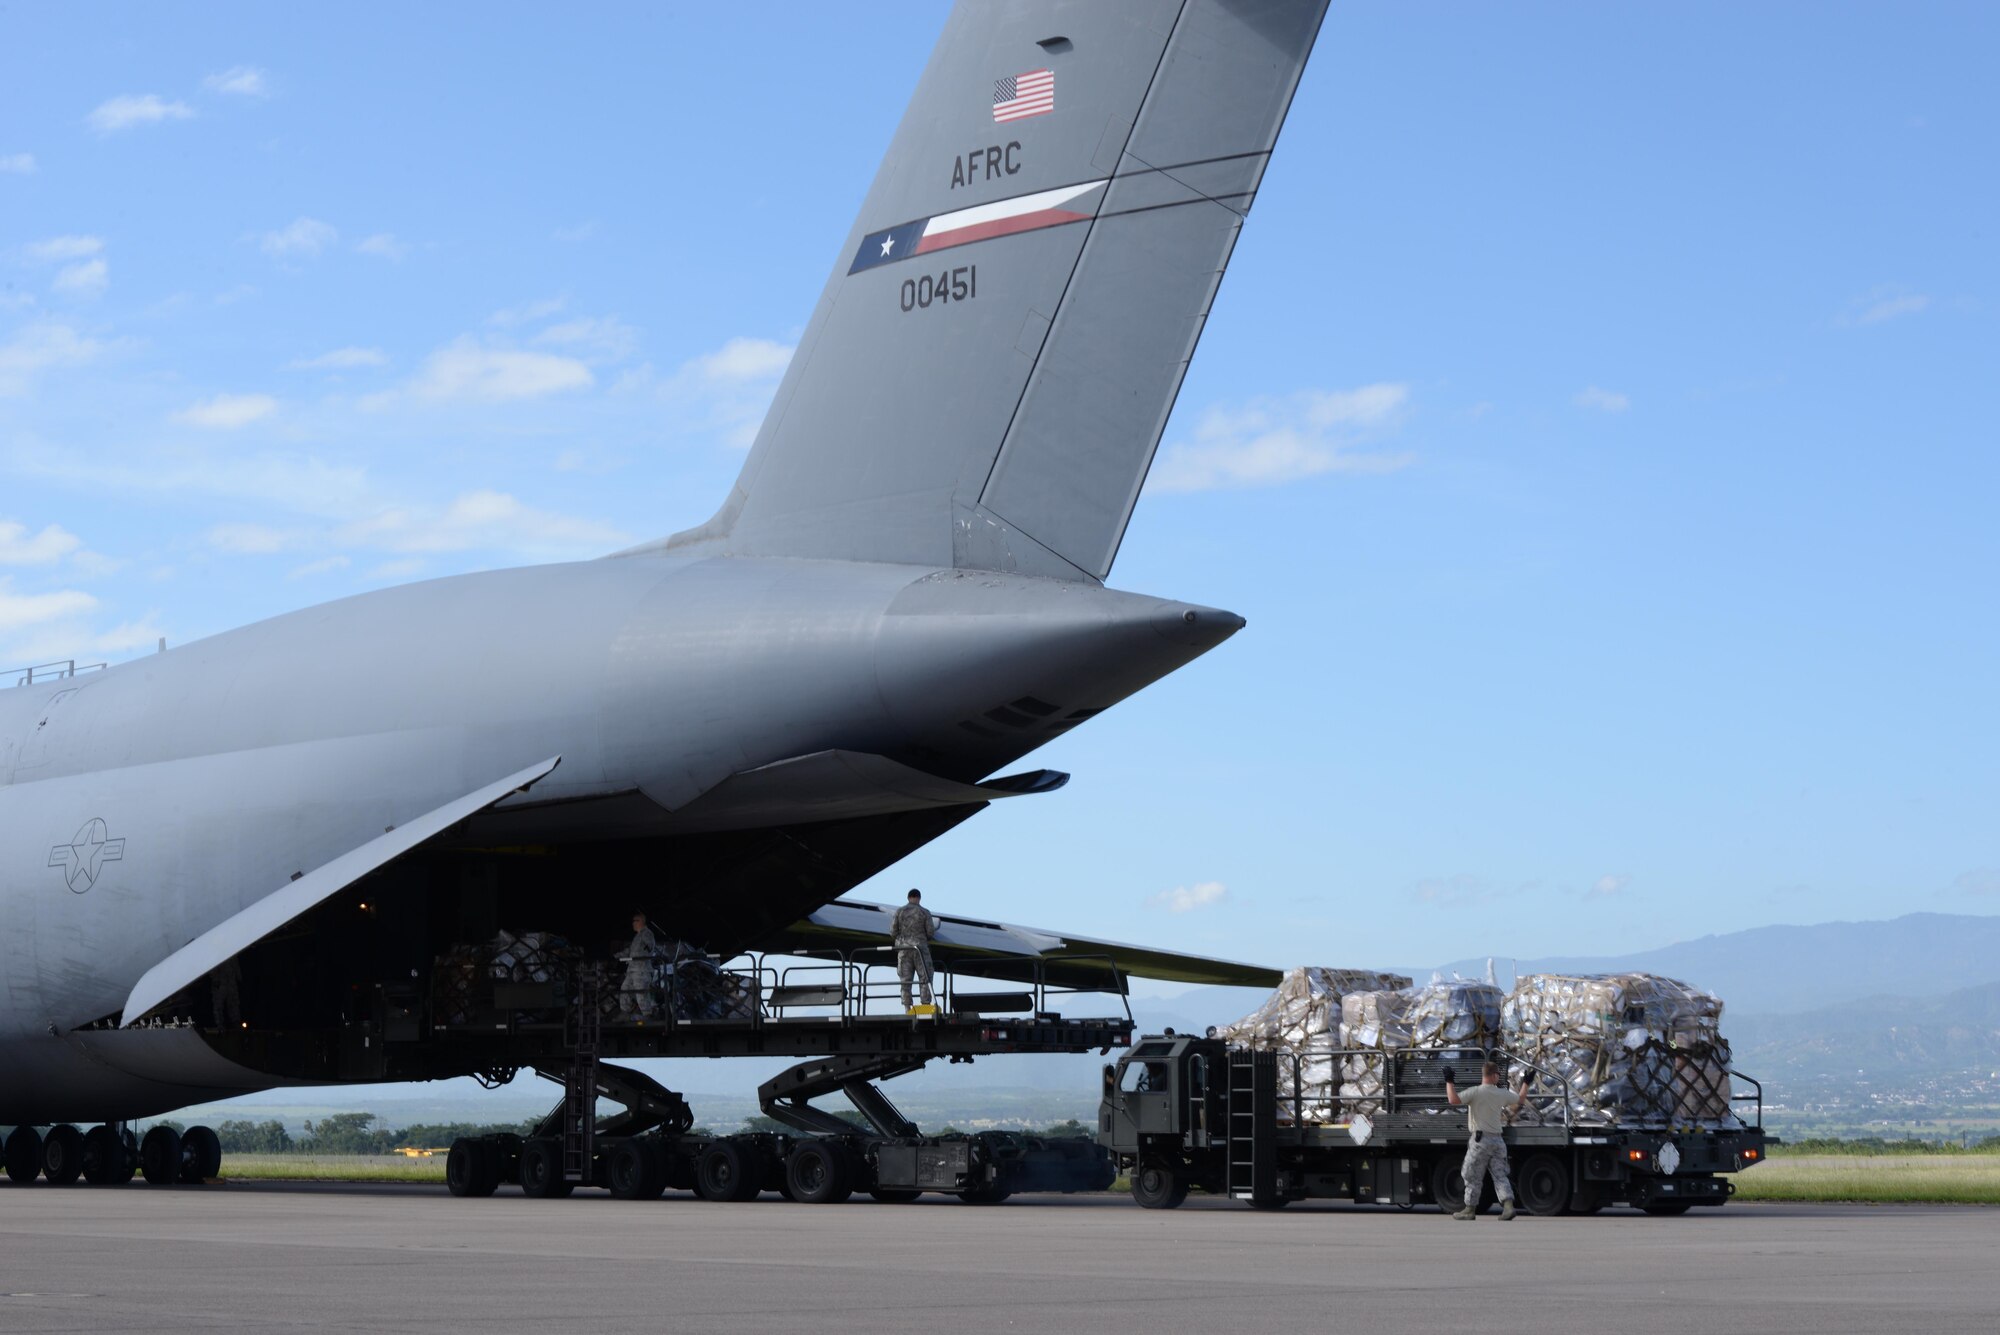 Members of the 612th Air Base Squadron unload humanitarian supplies from a C-5 Galaxy, assigned to the 68th Airlift Squadron, on Soto Cano Air Base, Honduras, Nov. 9, 2015. The C-5 delivered 23,415 pounds of cargo made possible by the Denton Program, which allows the use of extra space on U.S. military cargo aircraft to transport humanitarian assistance materials donated by nongovernment organizations, international organizations and private voluntary organizations for humanitarian relief. (U.S. Air Force photo/Senior Airman Westin Warburton)